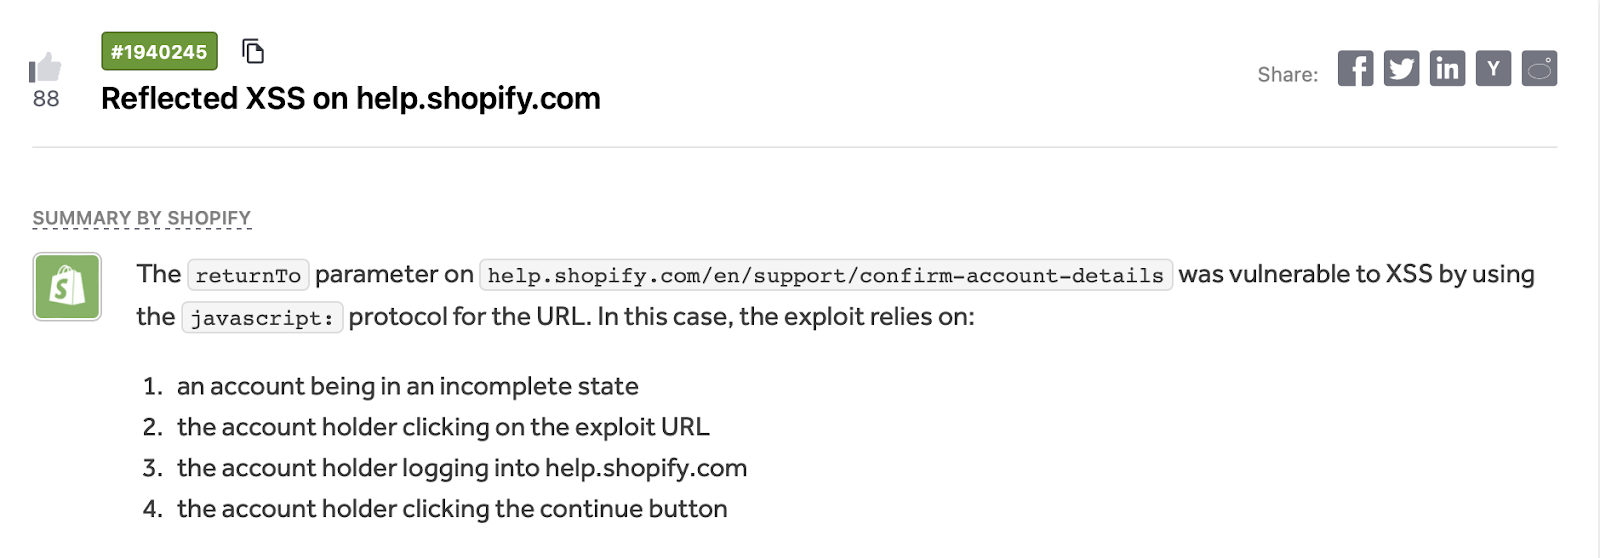 Reflected XSS report